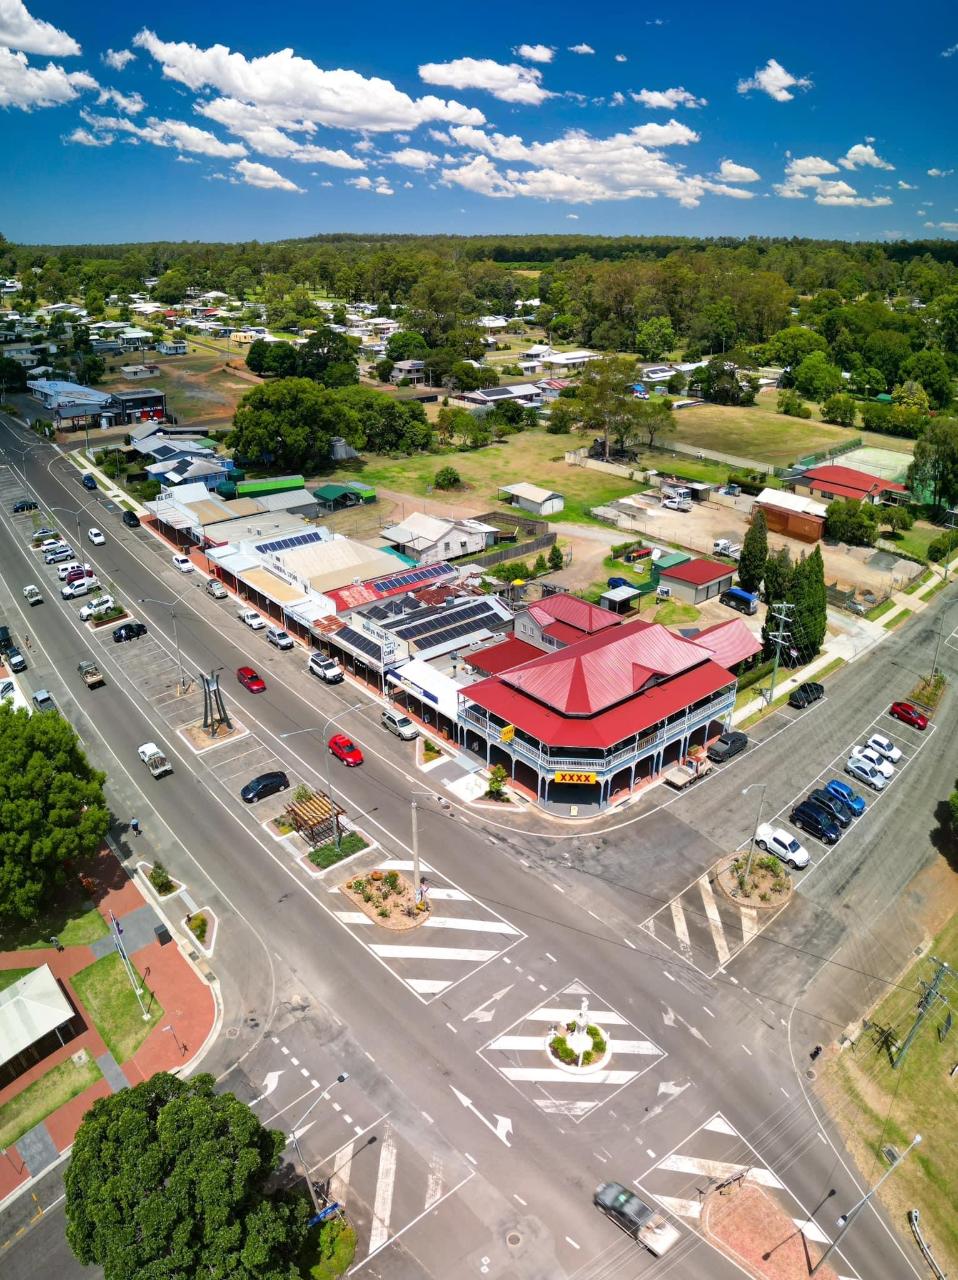 Aerial photography, drone photography by South Burnett Drones